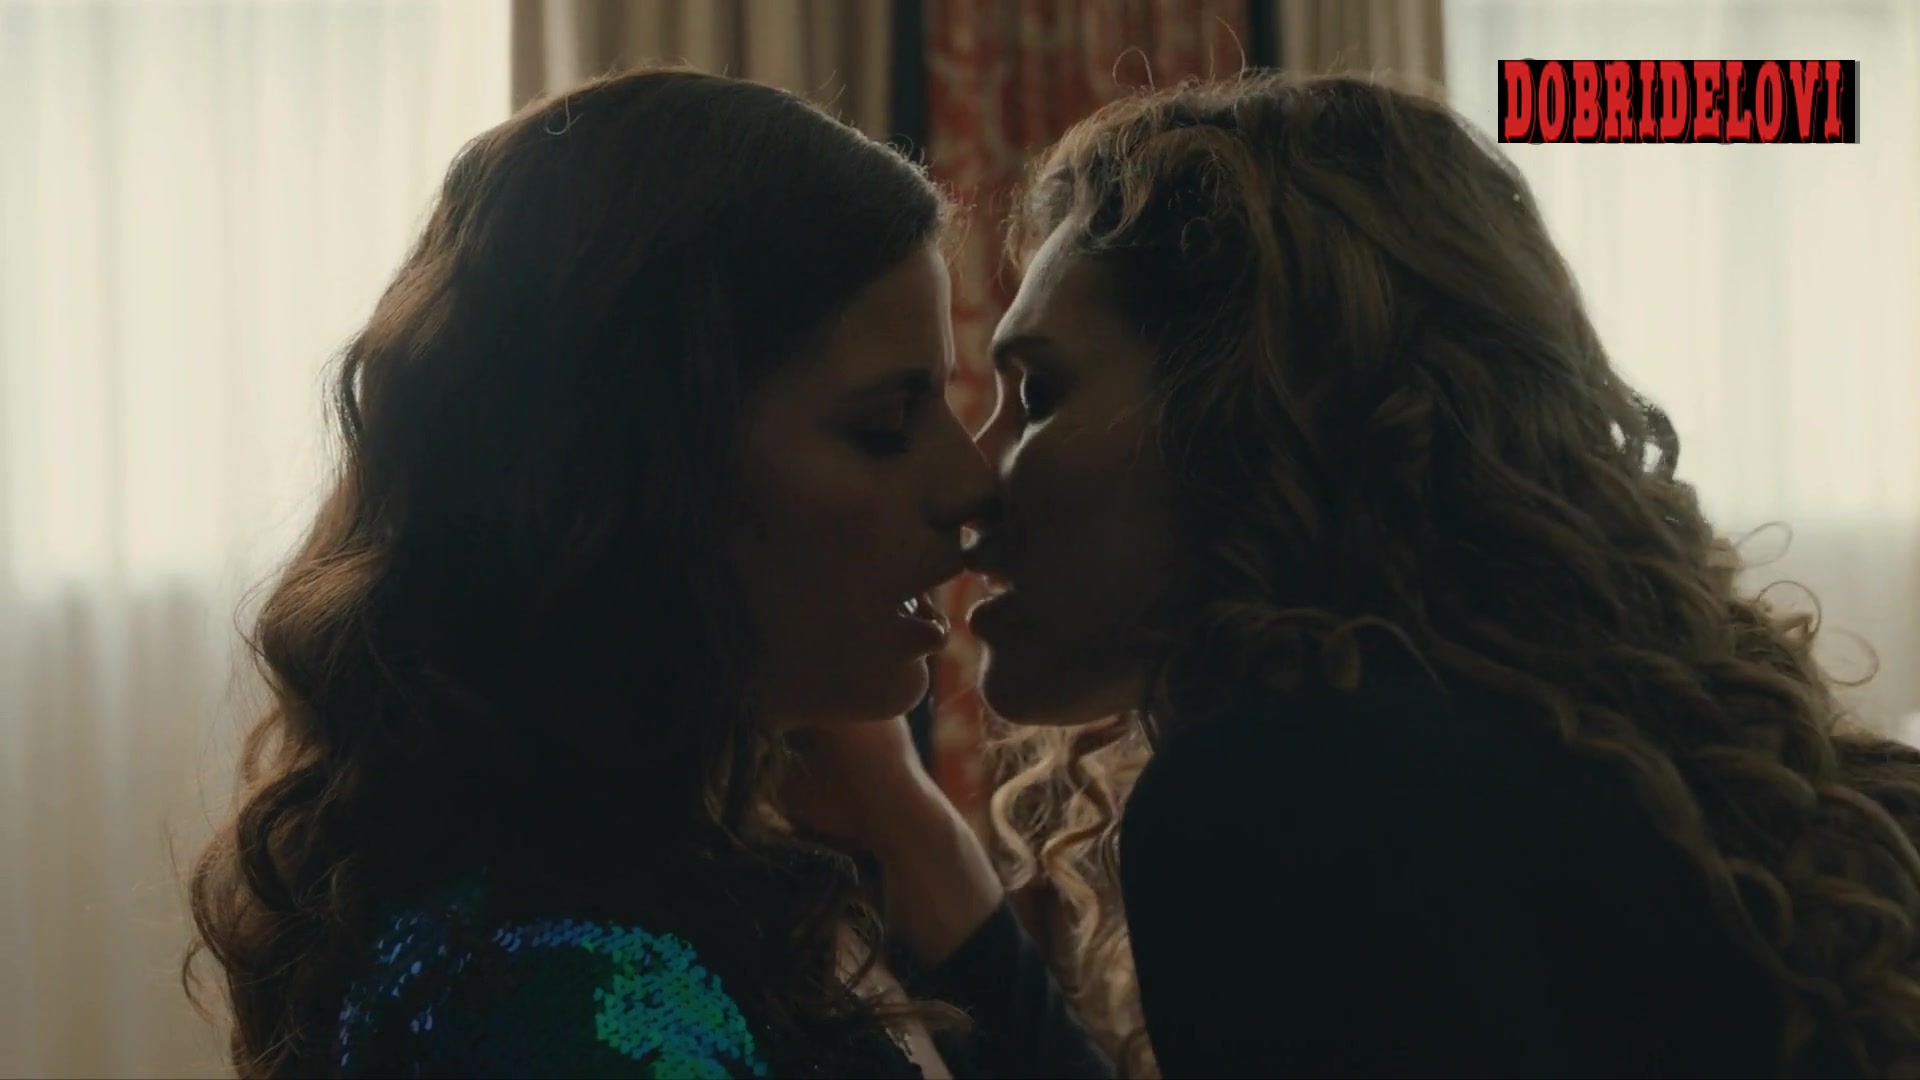 Anna Drijver, and Elise Schaap lesbian scene from Undercover